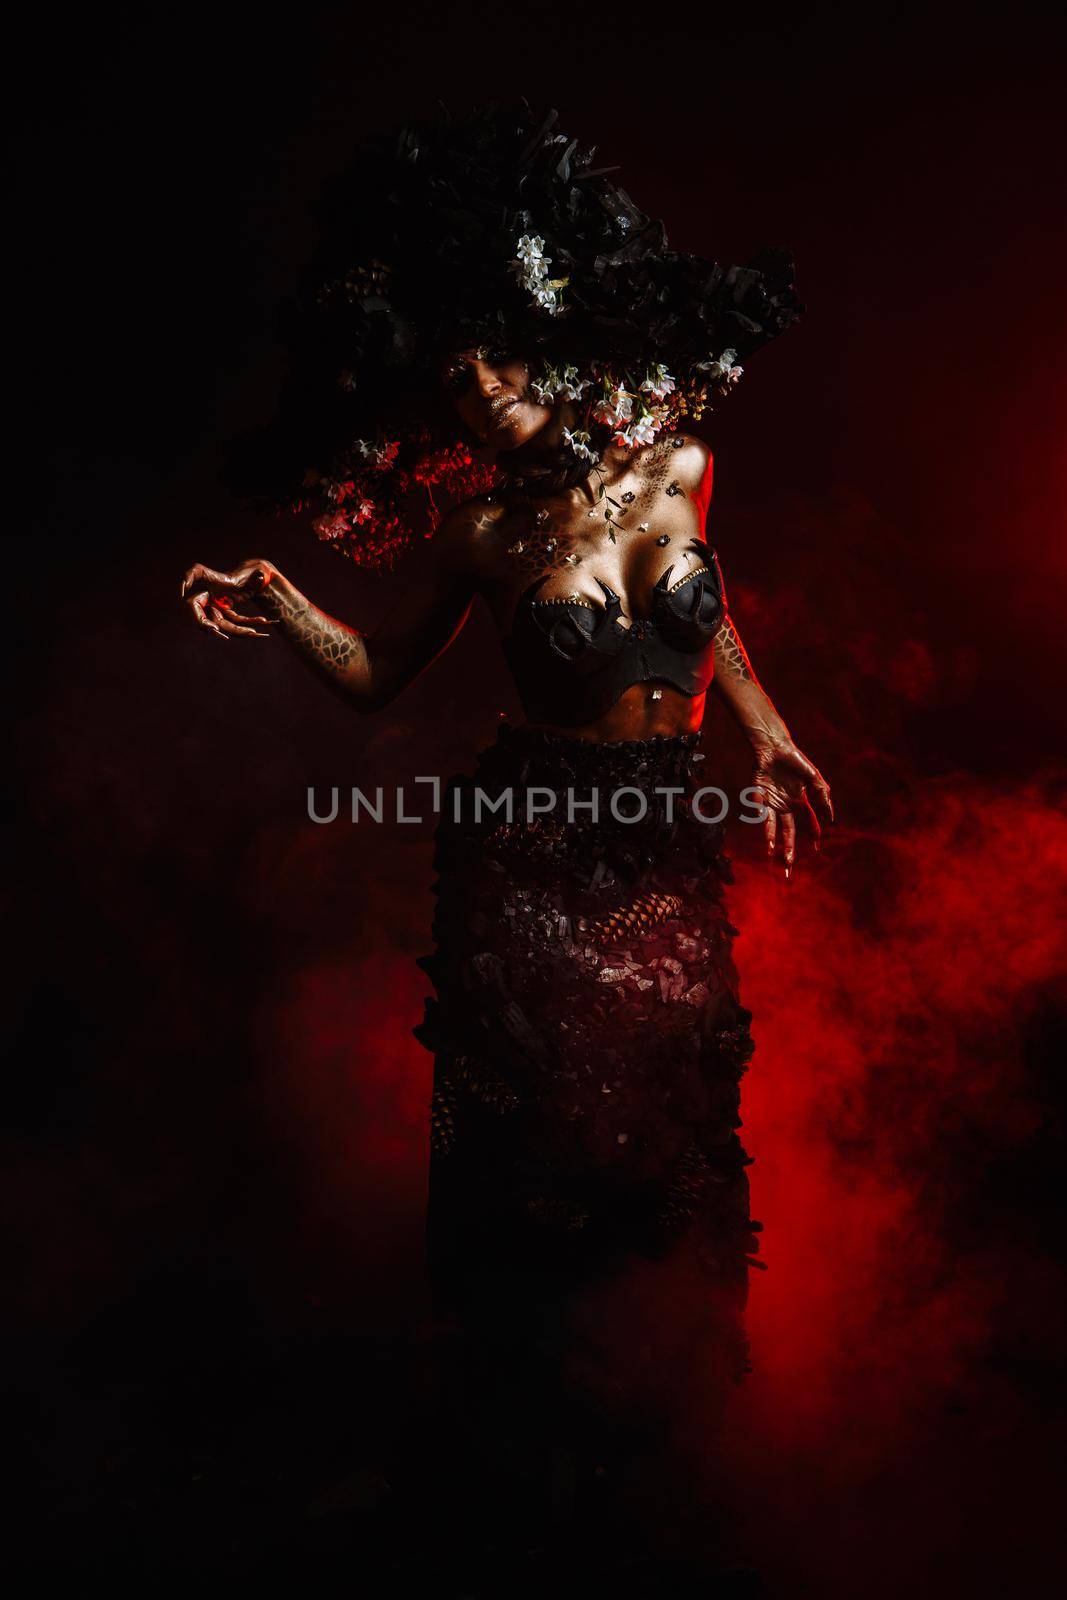 Portrait of a model in a headdress and dress made of coal. There is red smoke behind the model.